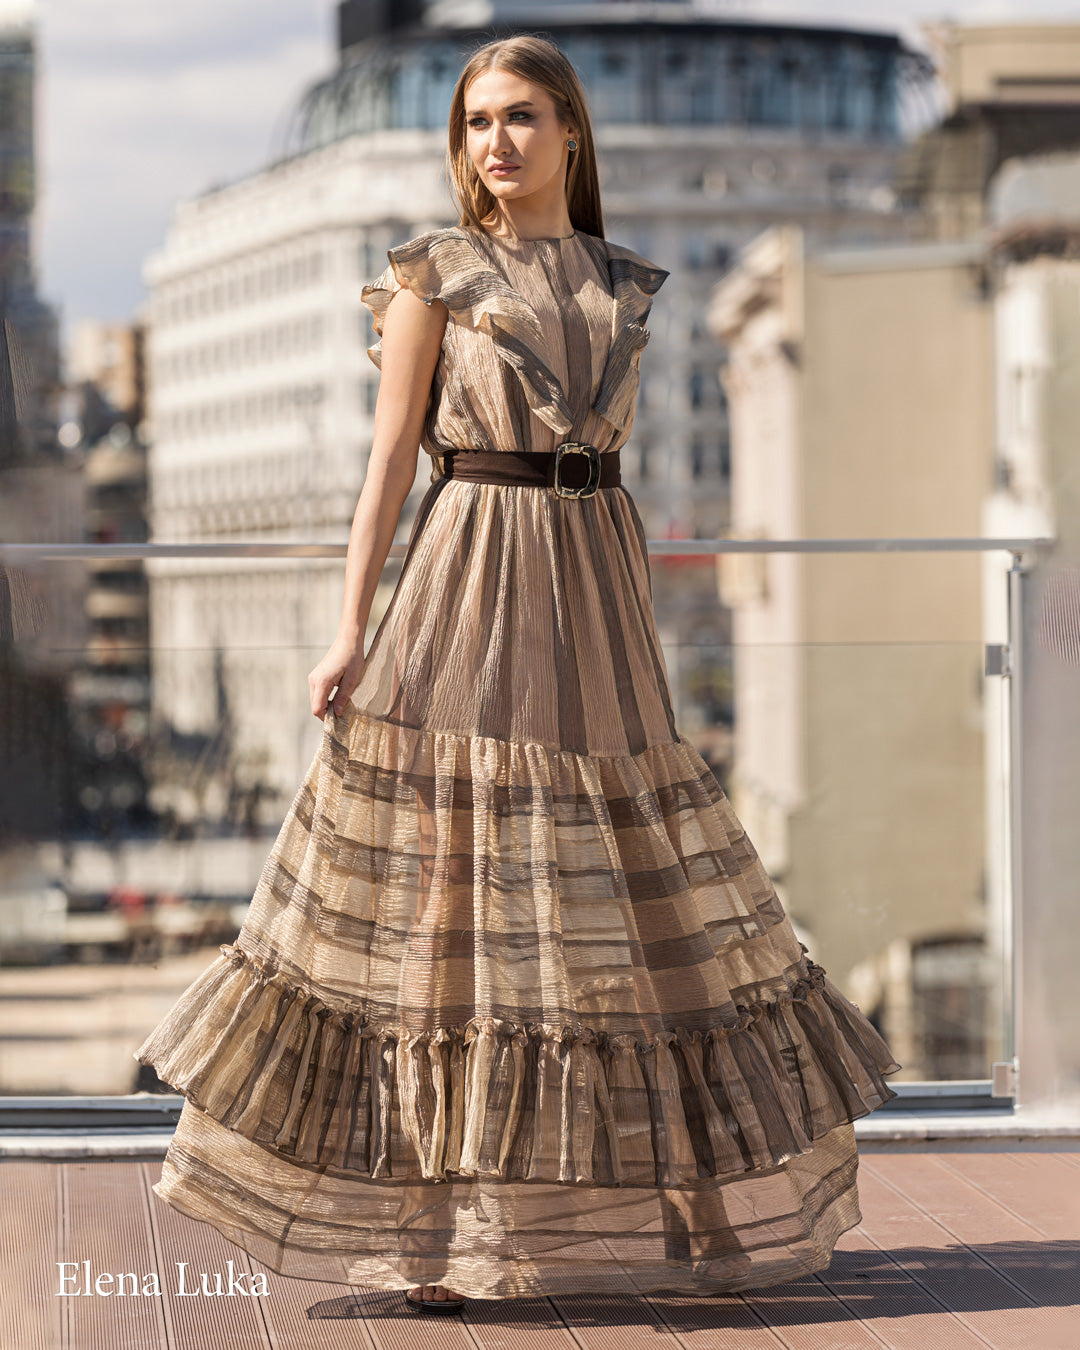 Must have: Boho dress in earthy shades